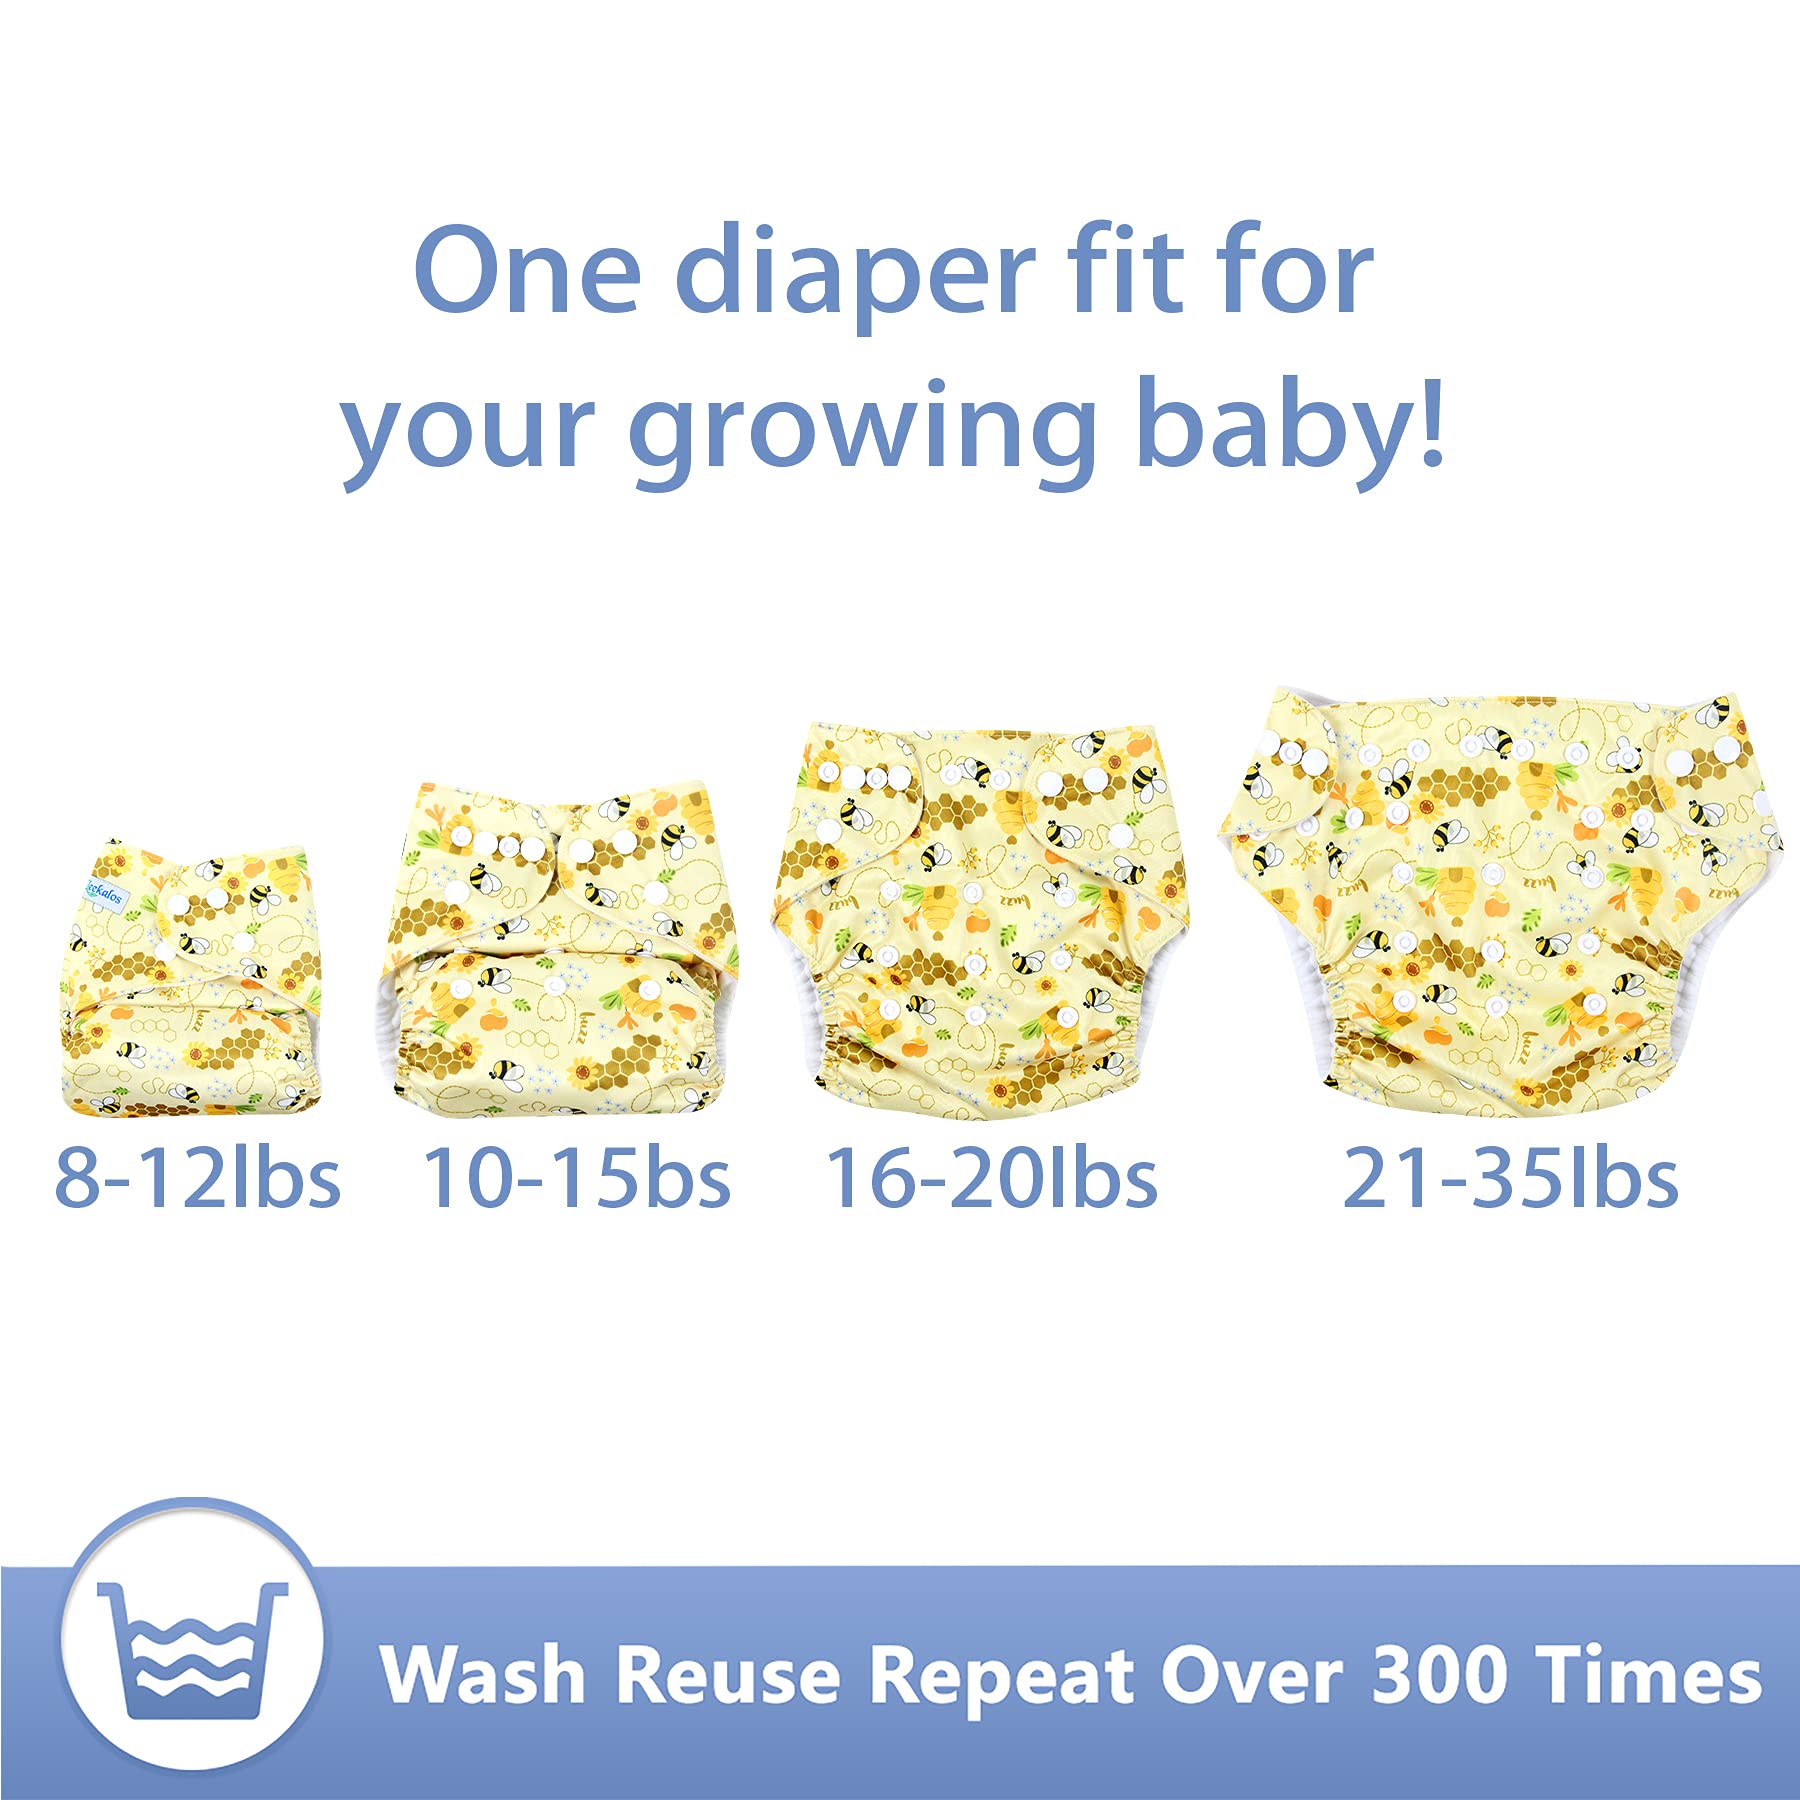 Leekalos Cloth Diapers Reusable for Boys and Girls, Baby Diaper Cloth with Bamboo Inserts & Wet Bag (Koala & Bee) one Size